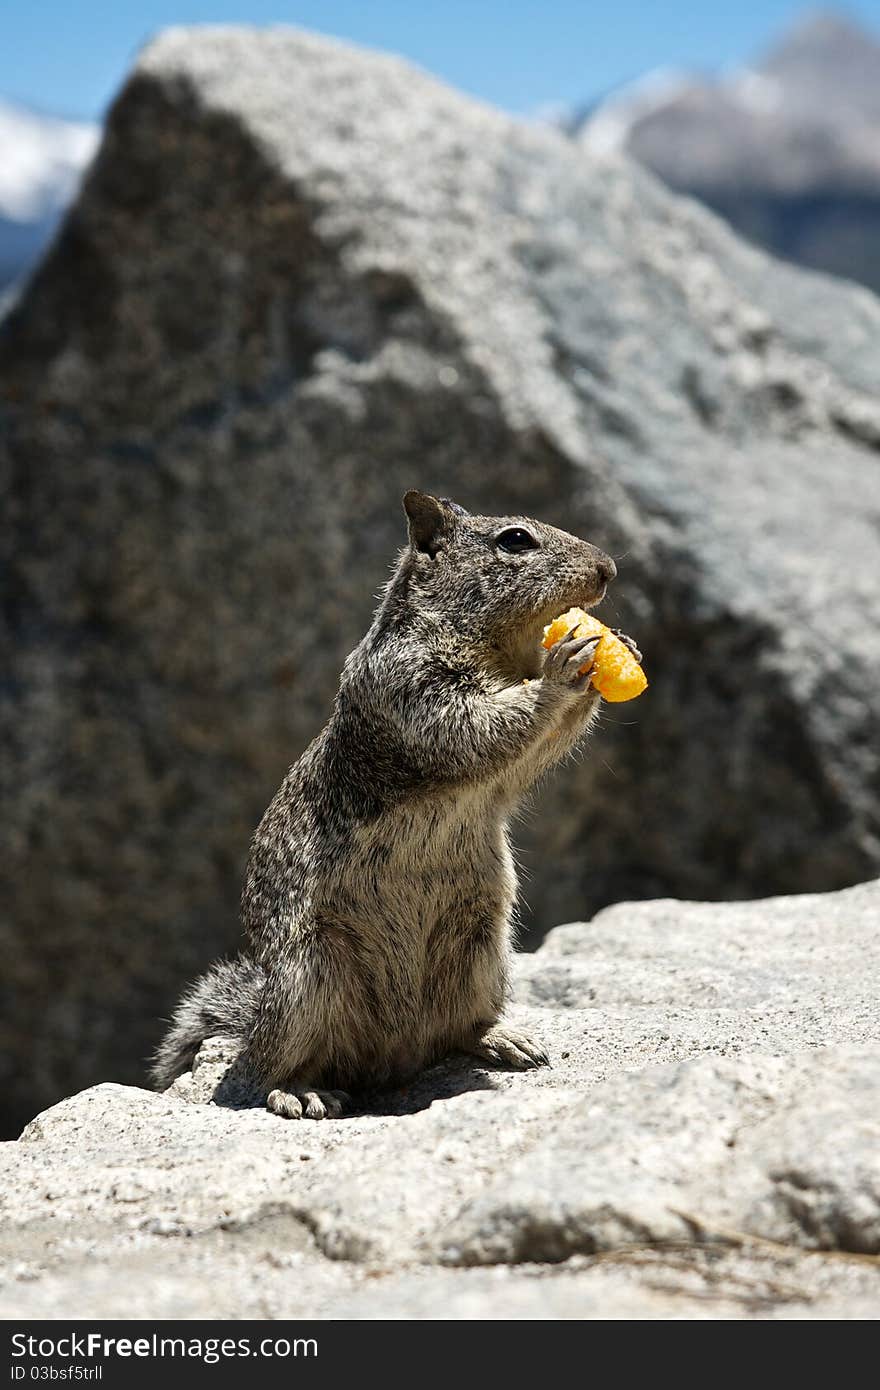 A squirrel in Yosemite National Park enjoys snacking on a cheese puff stolen from the tourists. A squirrel in Yosemite National Park enjoys snacking on a cheese puff stolen from the tourists.